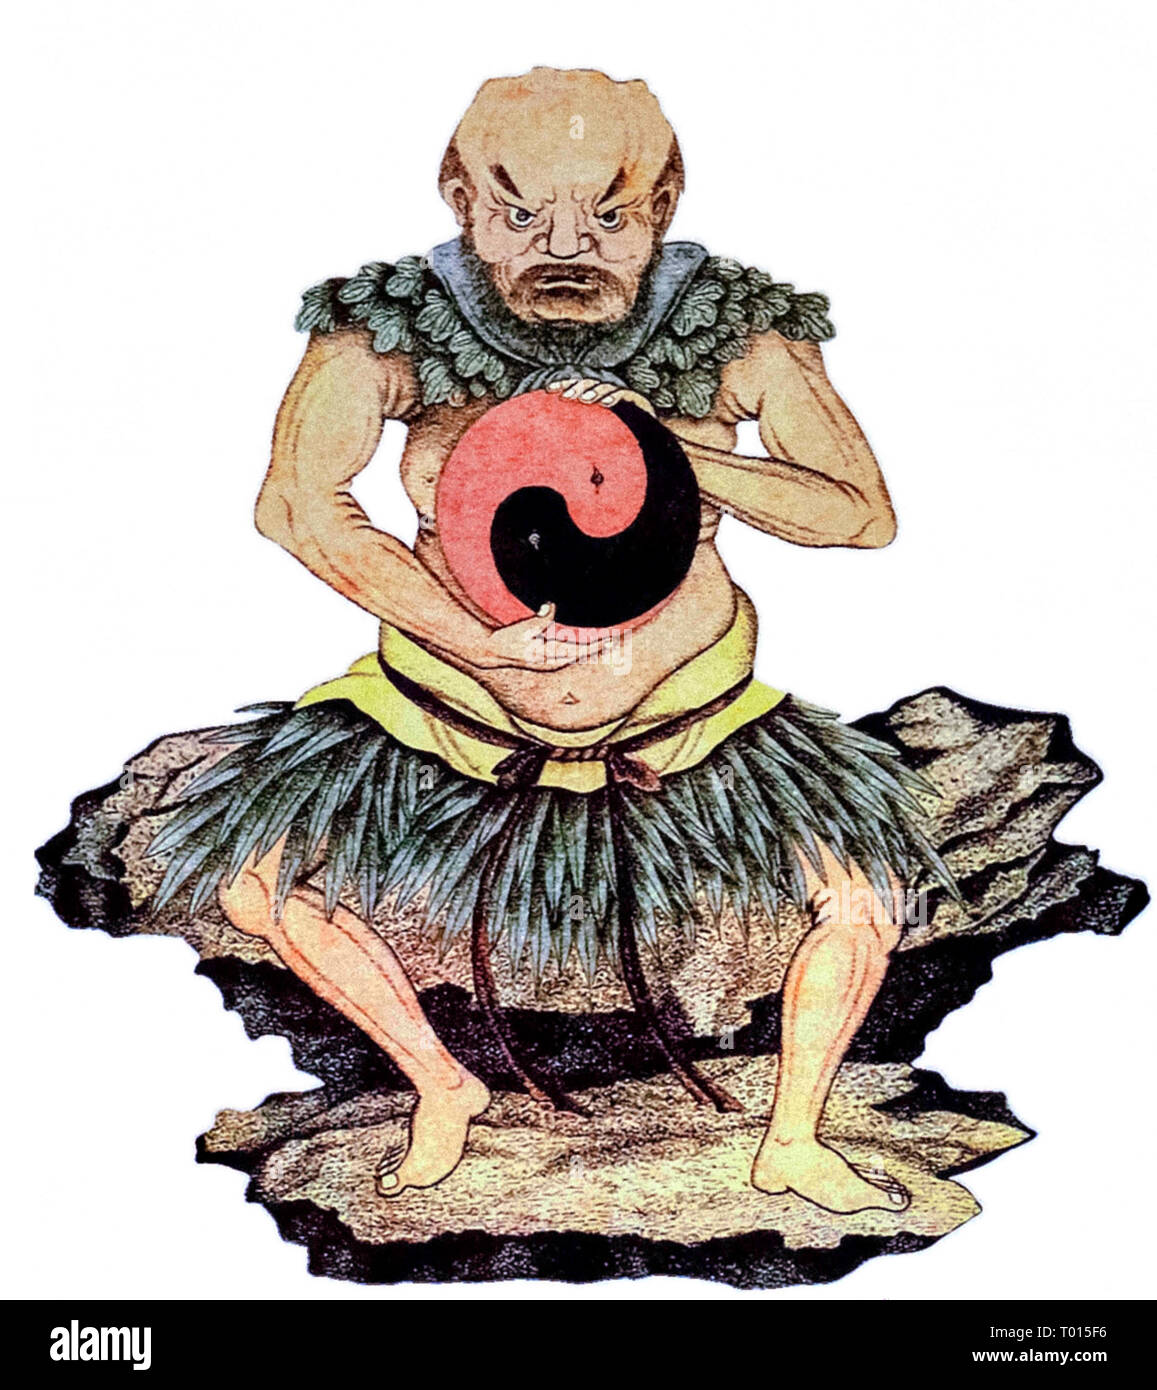 Pangu, the creator and first living being in Chinese mythology holding the cosmic egg, the Yin and Yang from which he emerged. 18th century hand painted lithograph. Stock Photo